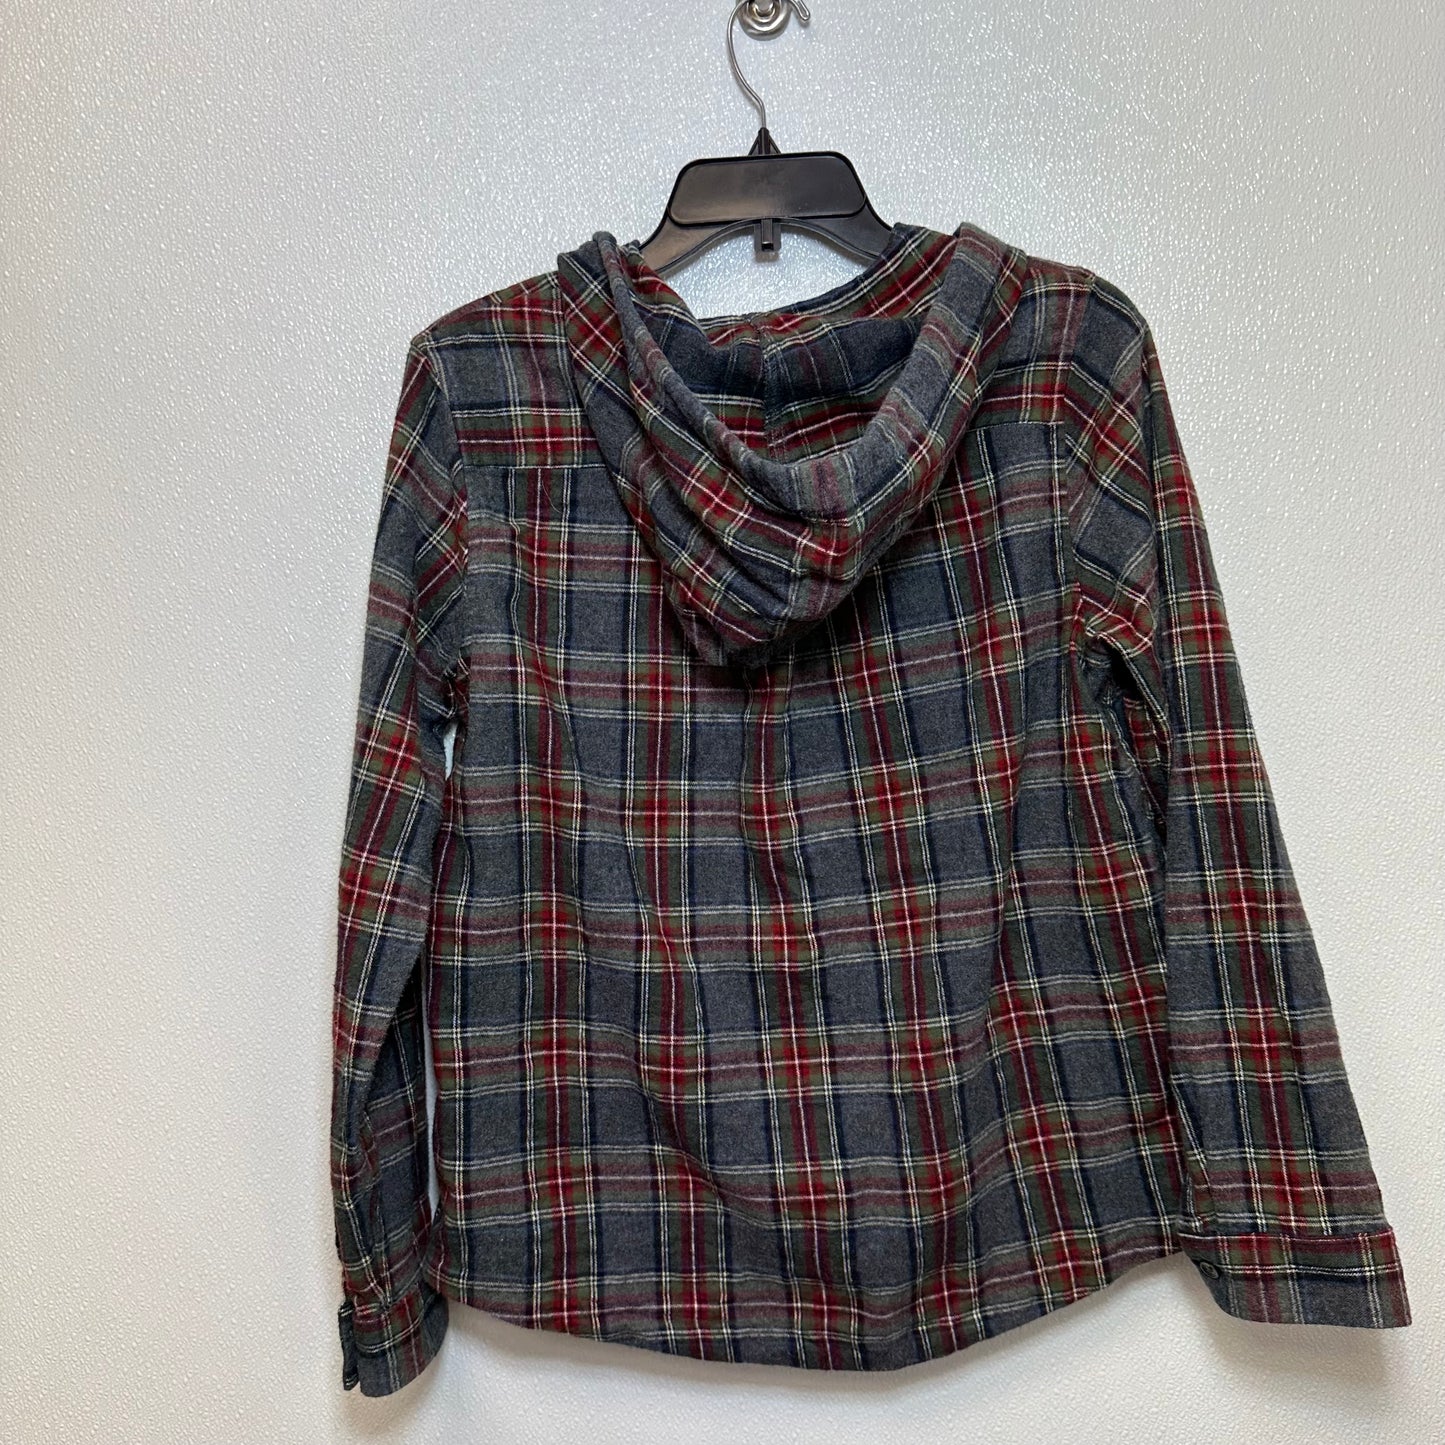 Jacket Shirt By Ll Bean  Size: S